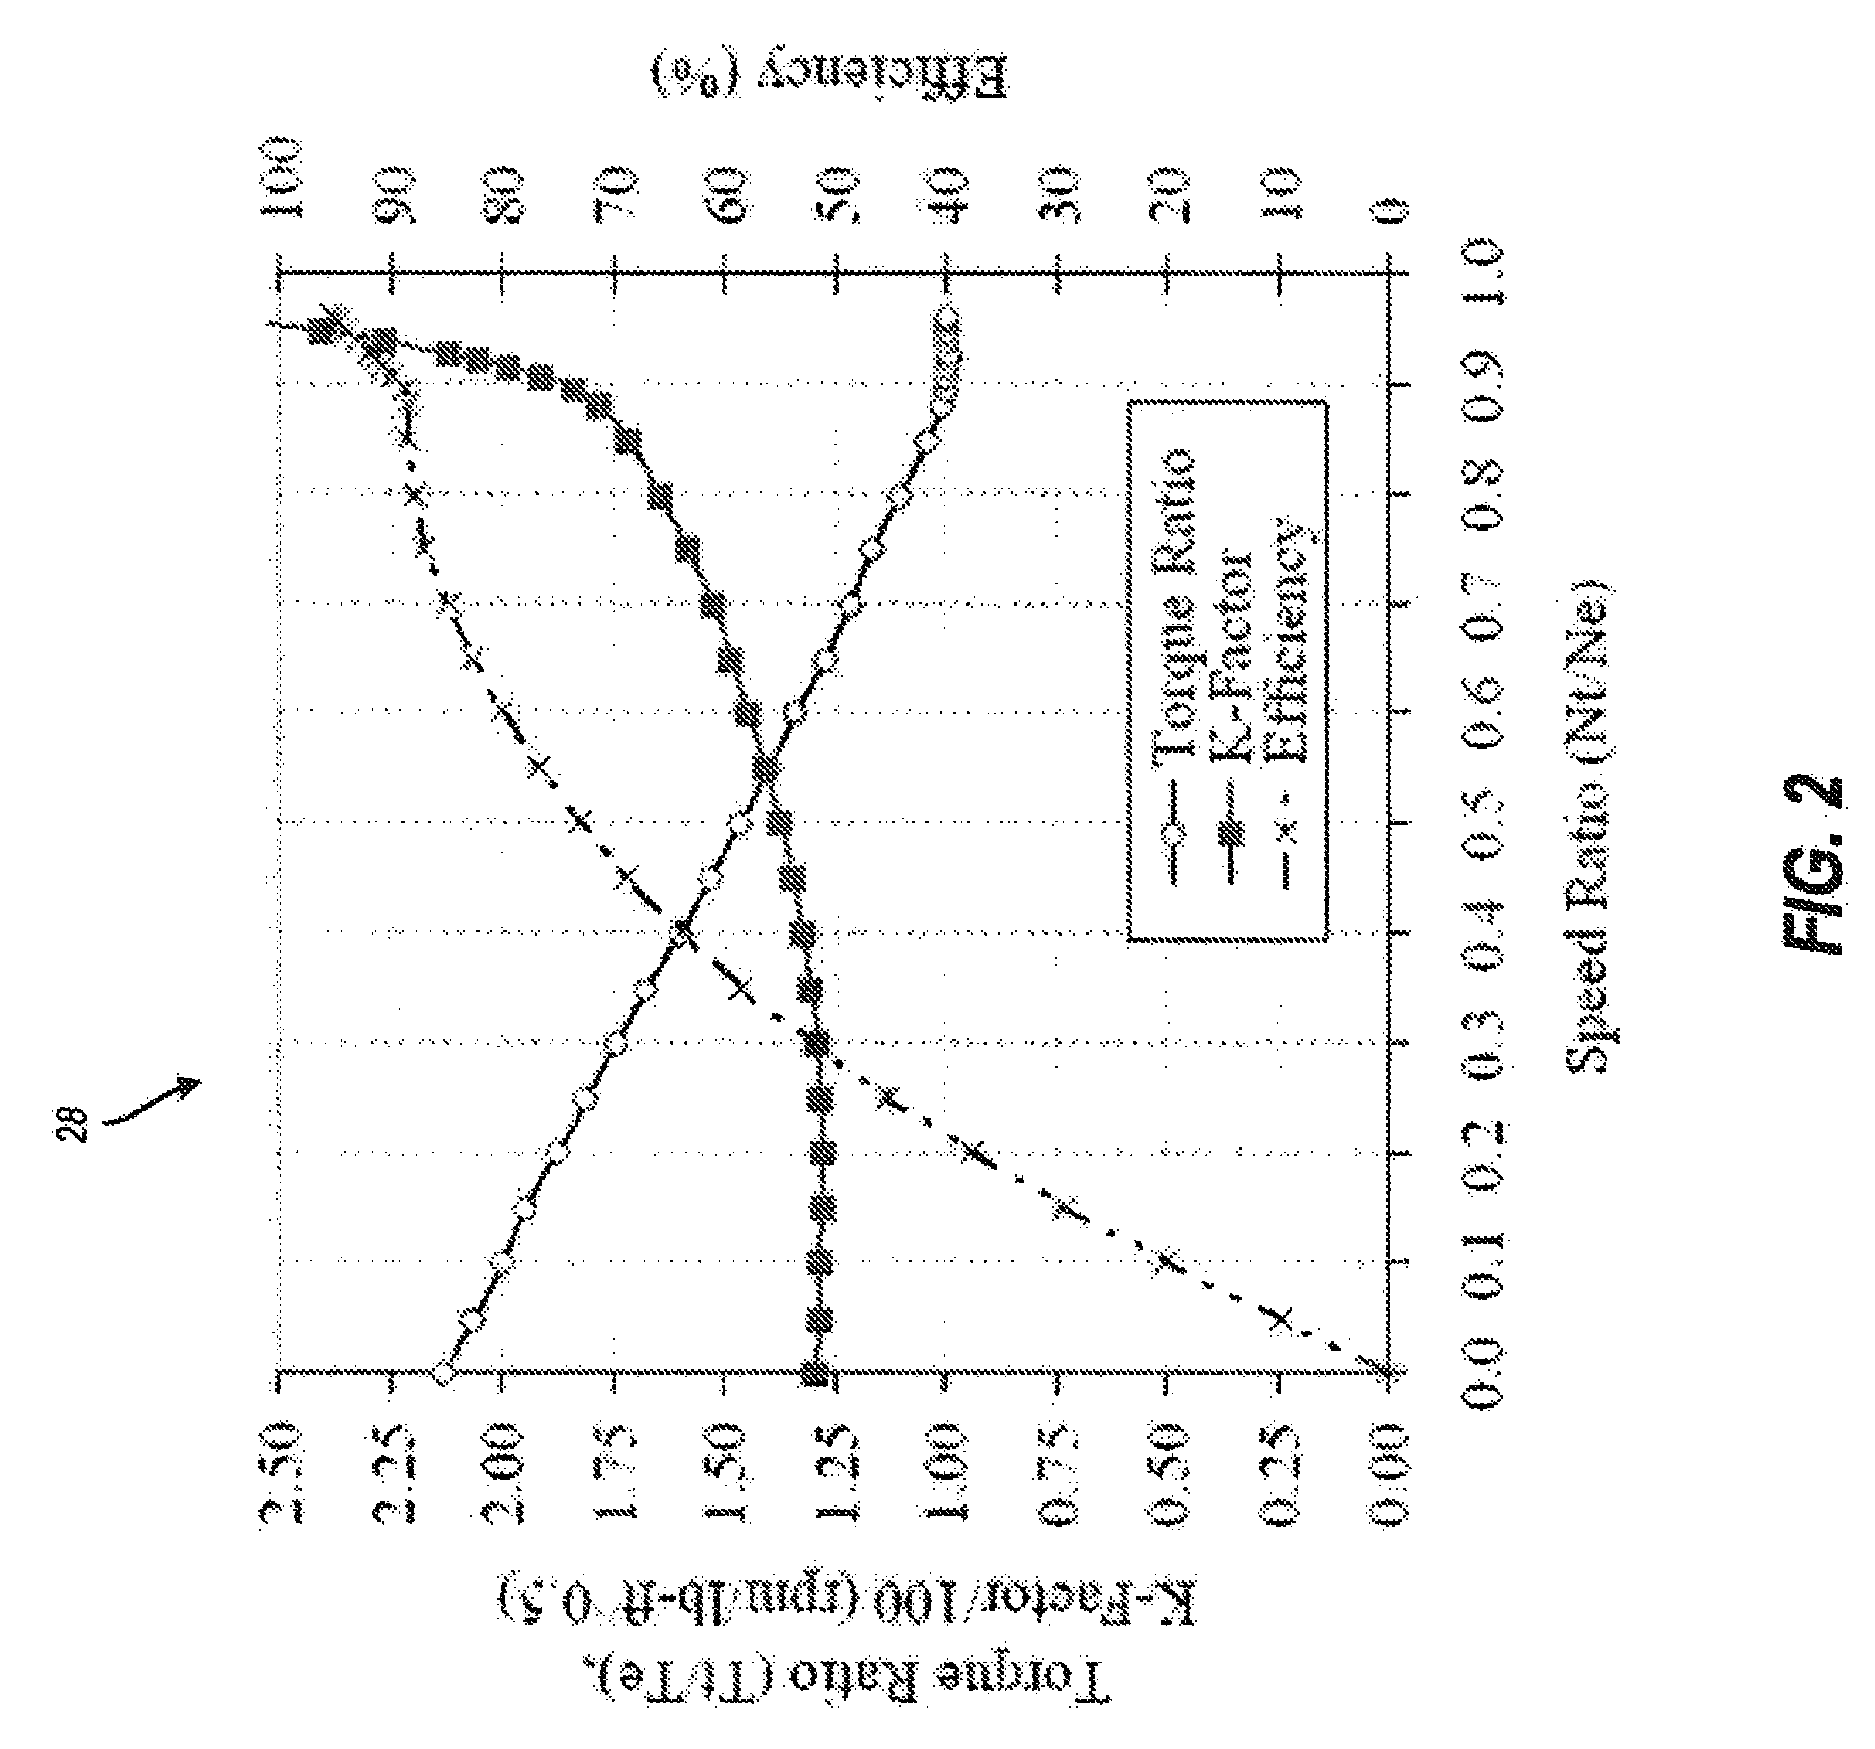 Methods and systems for powertrain optimization and improved fuel economy